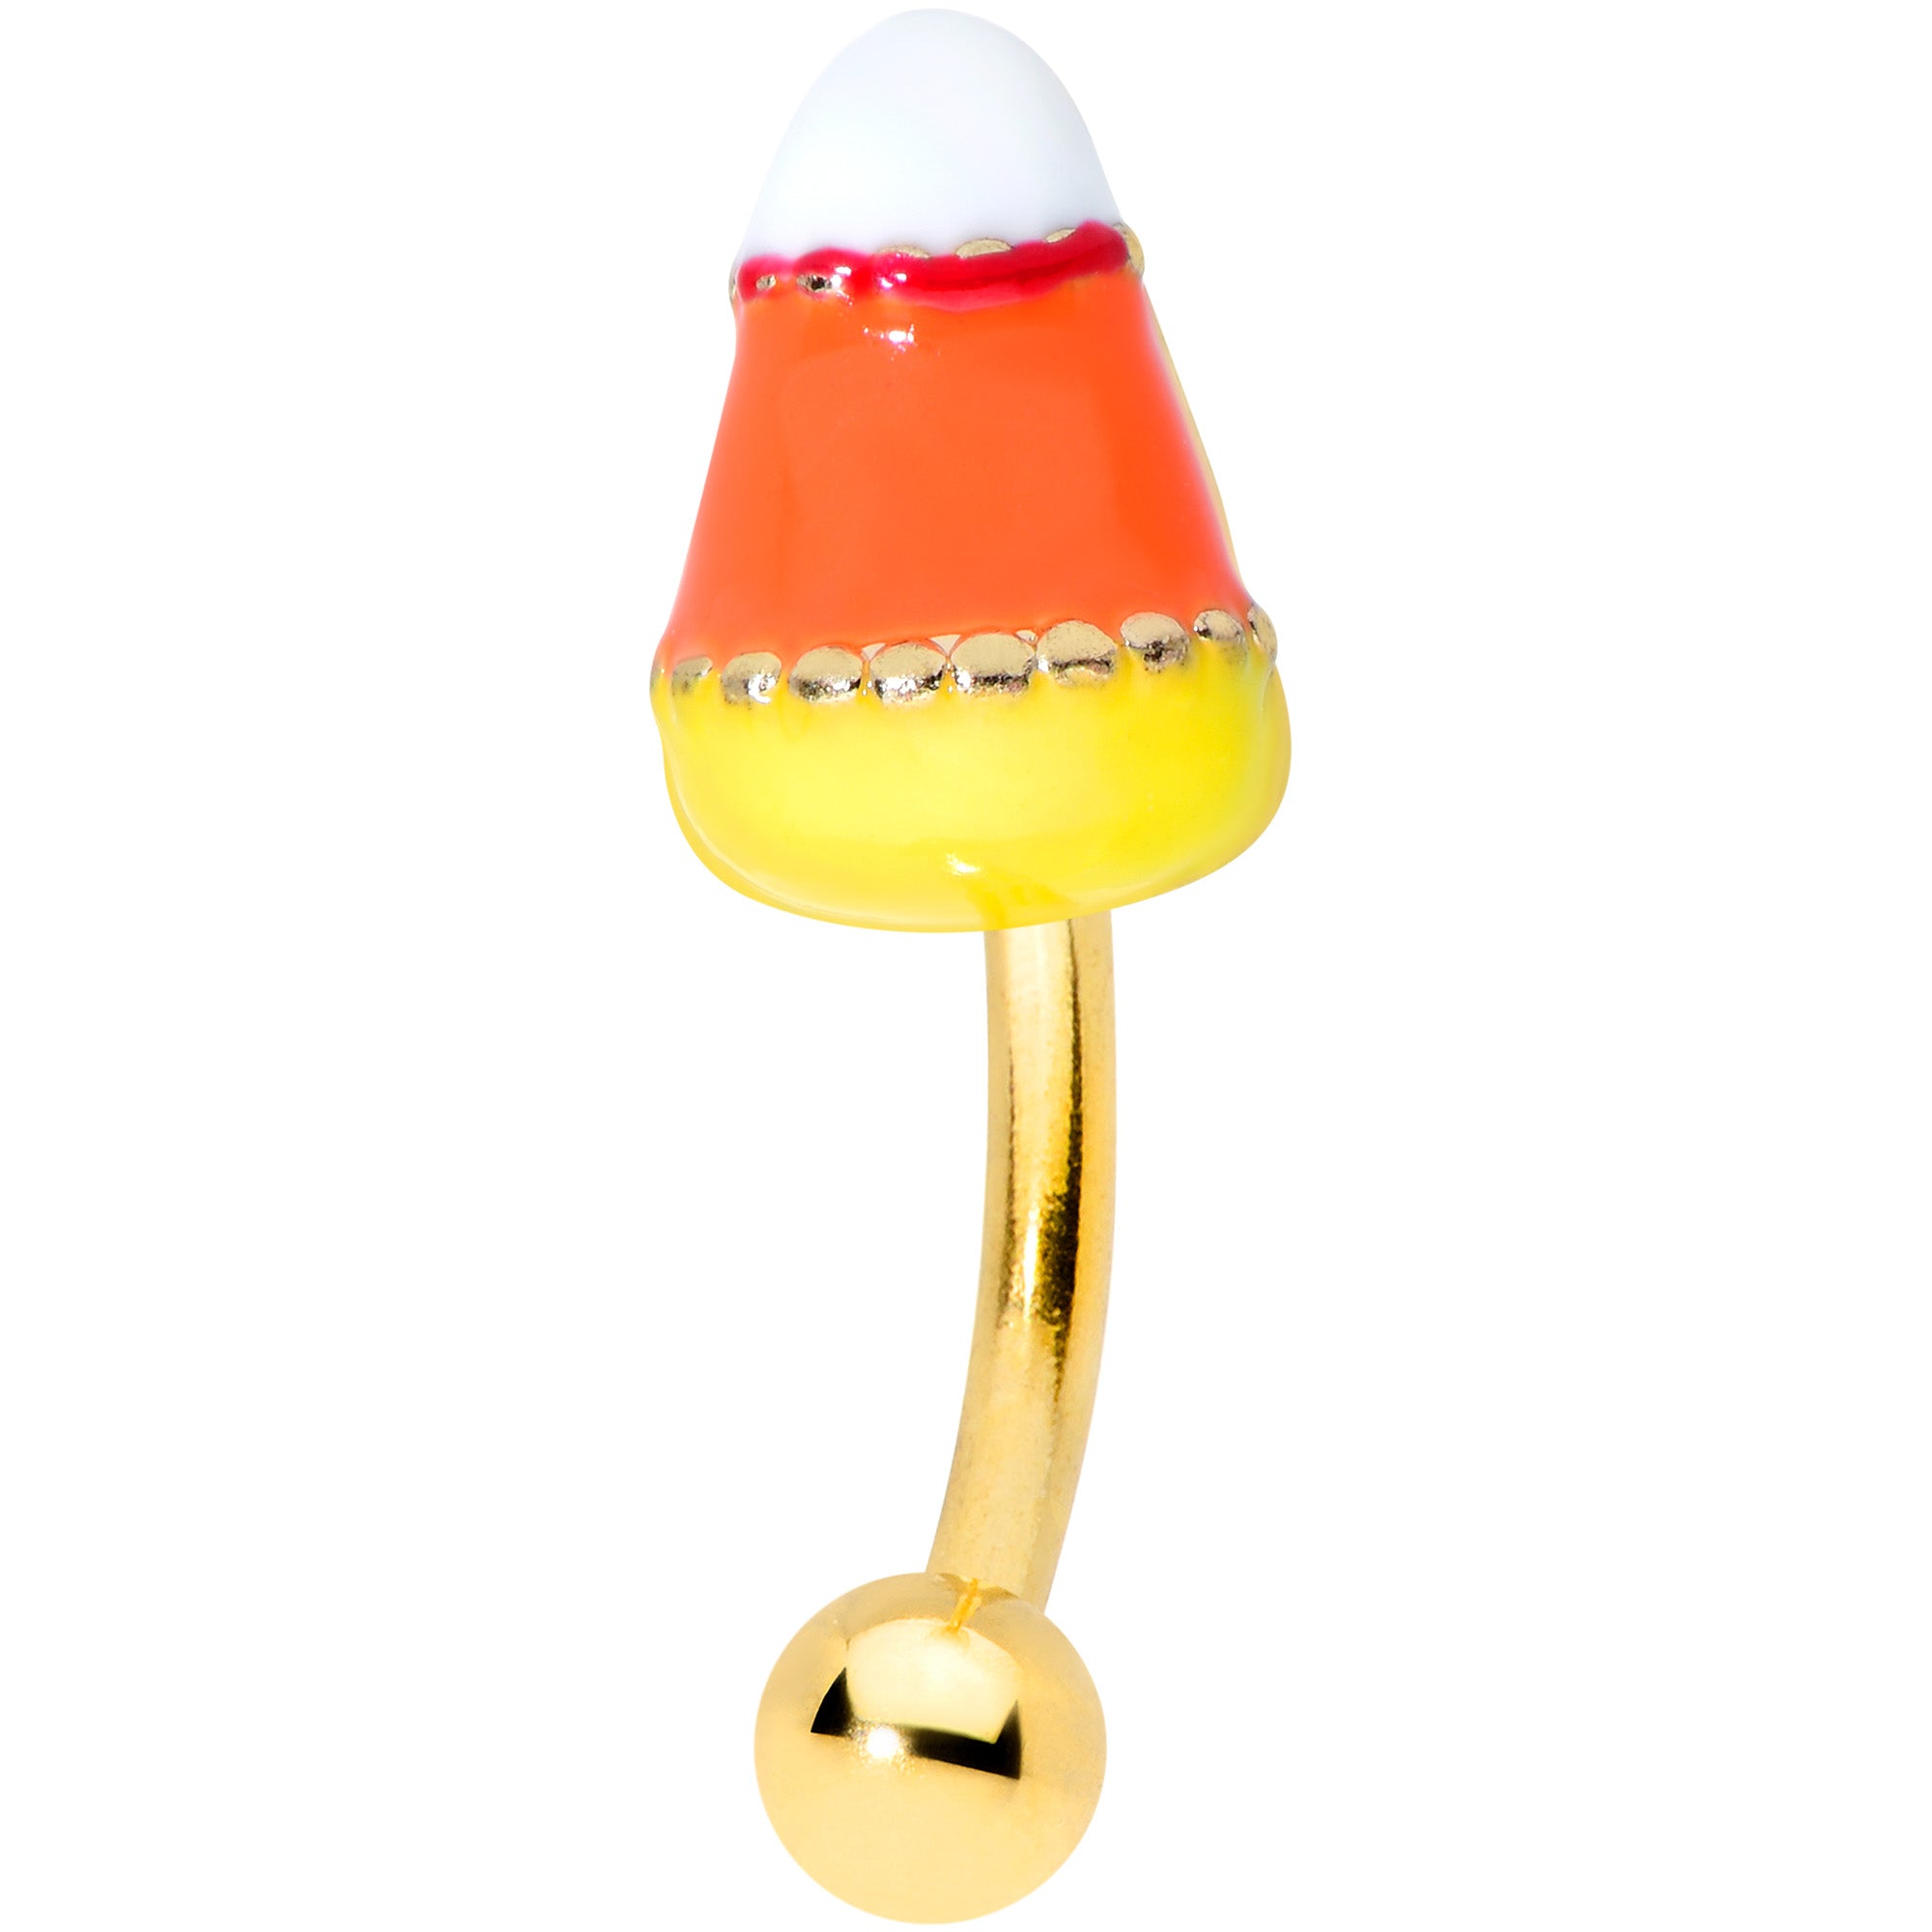 16 Gauge 5/16 Gold Tone Candy Corn Halloween Curved Eyebrow Ring